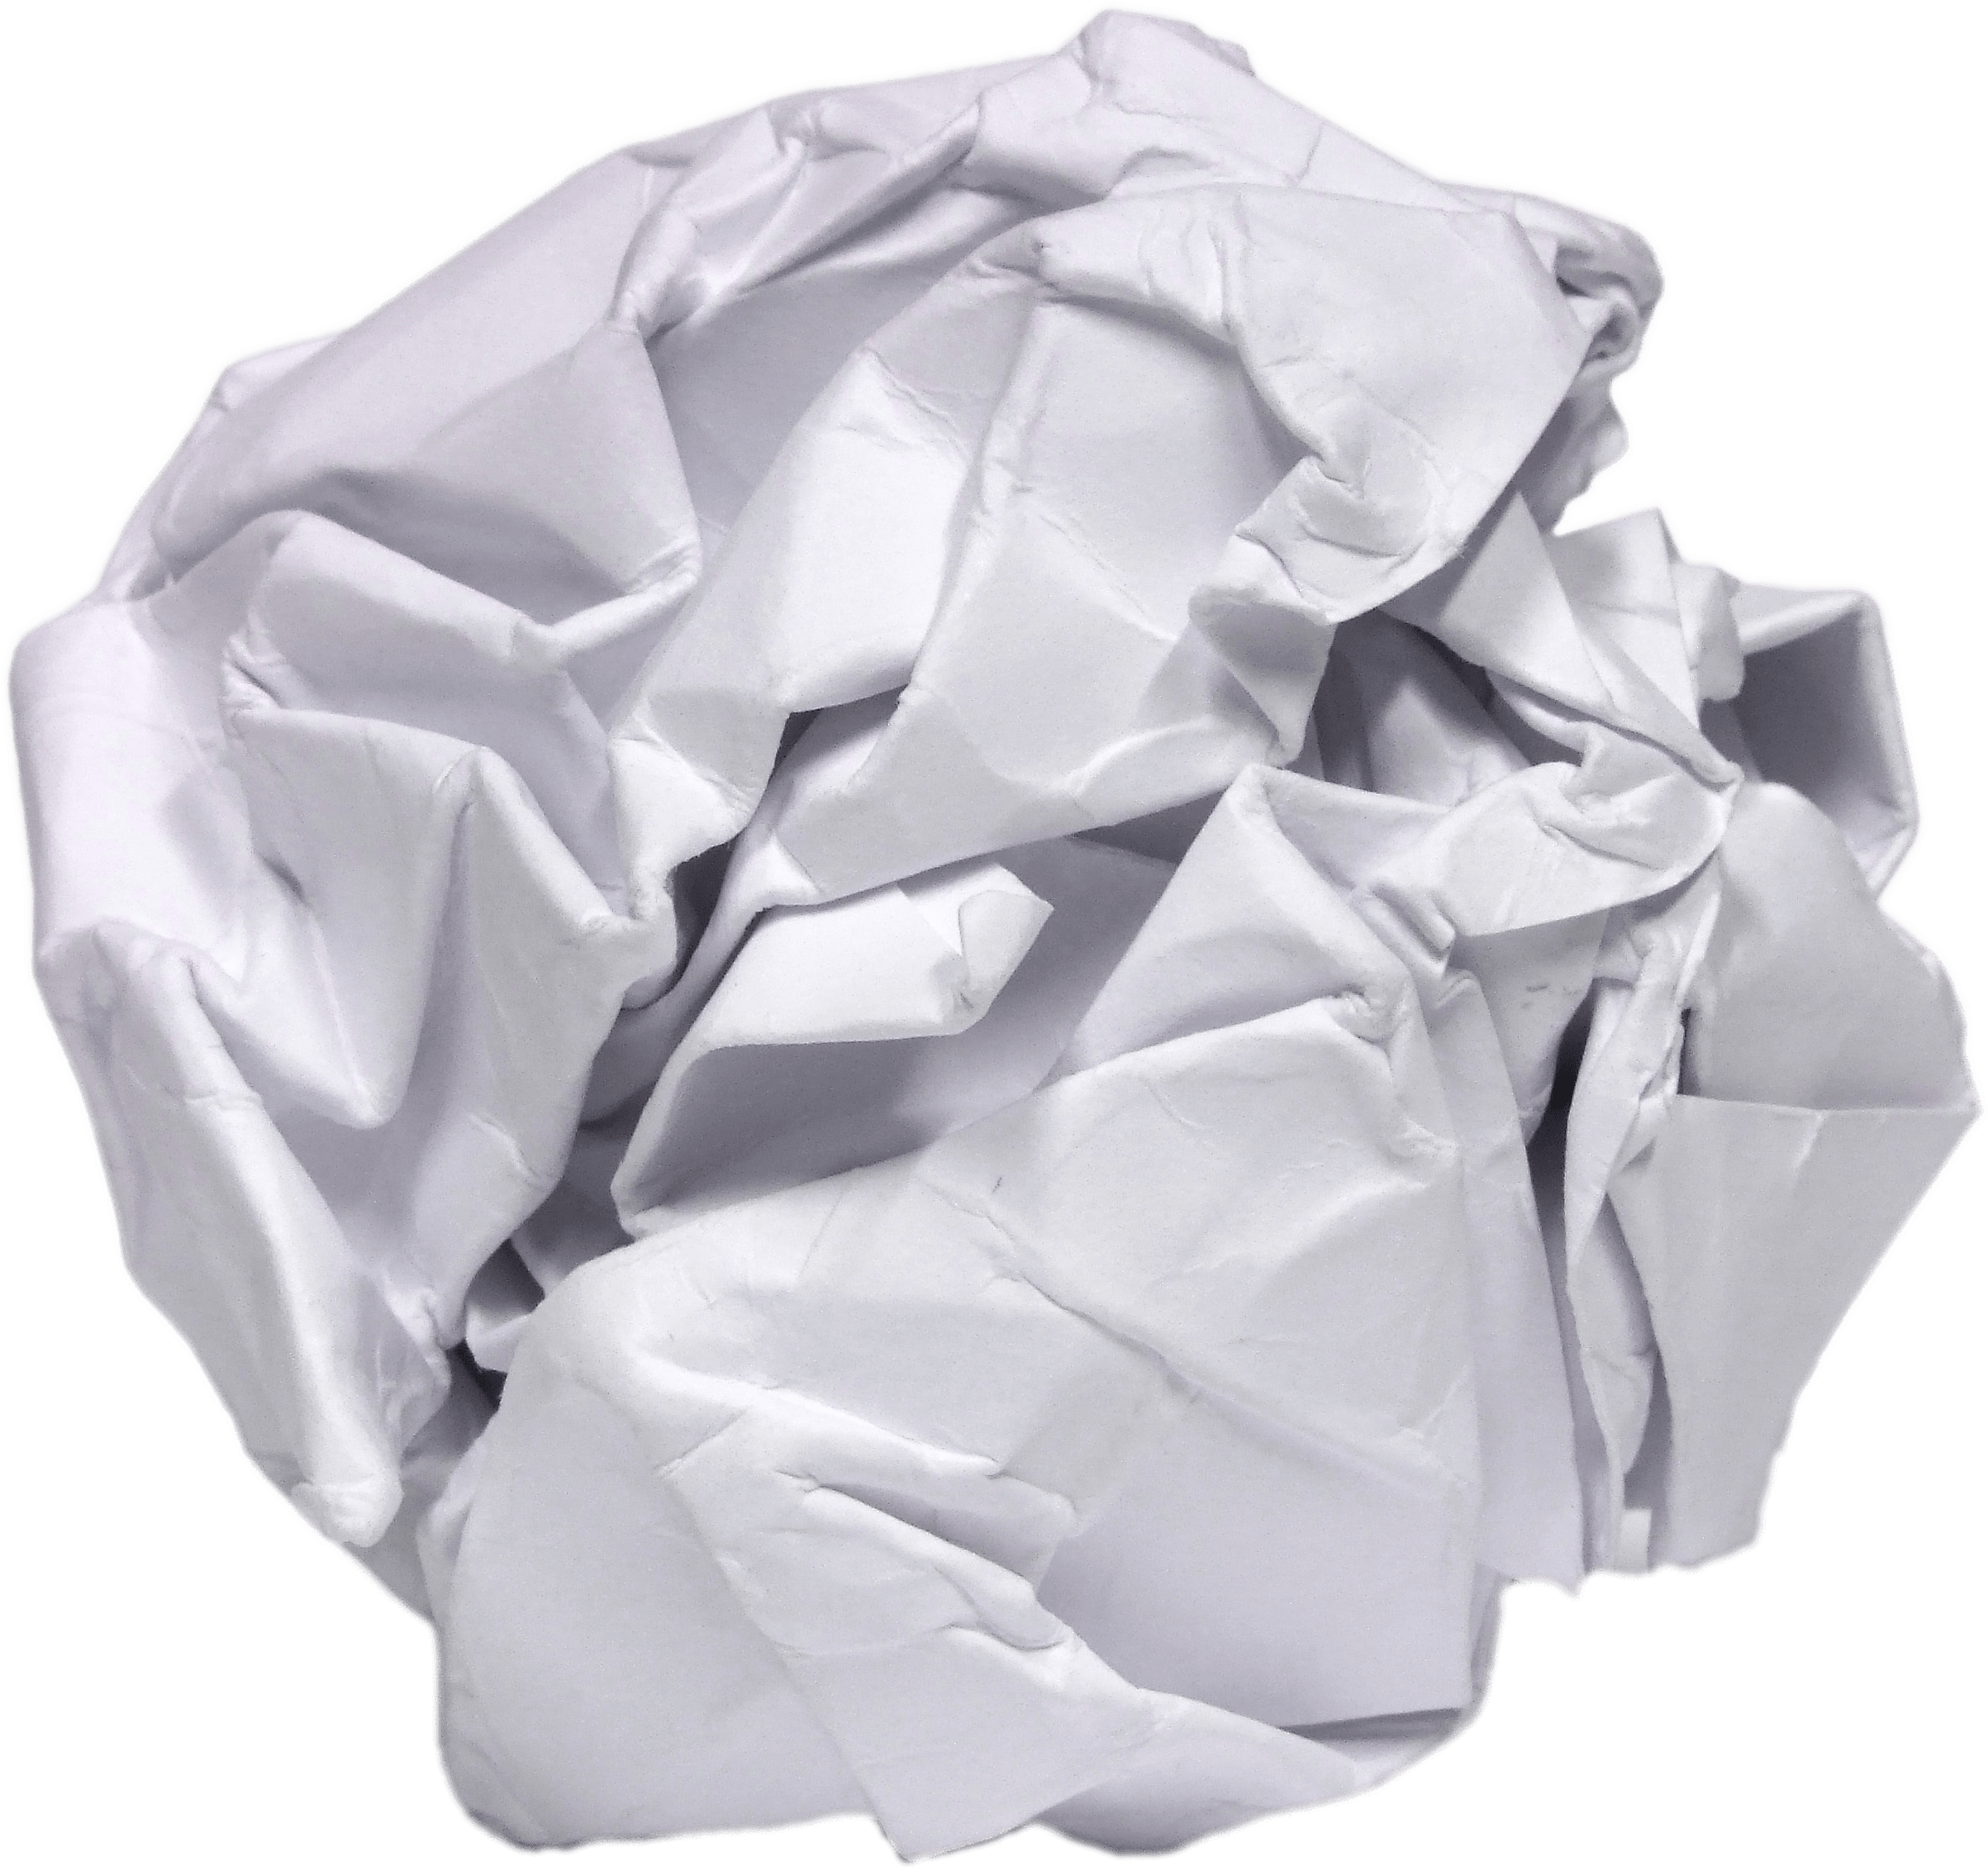 Crumpled Paper Ball - Paper Ball, Hd Png Download